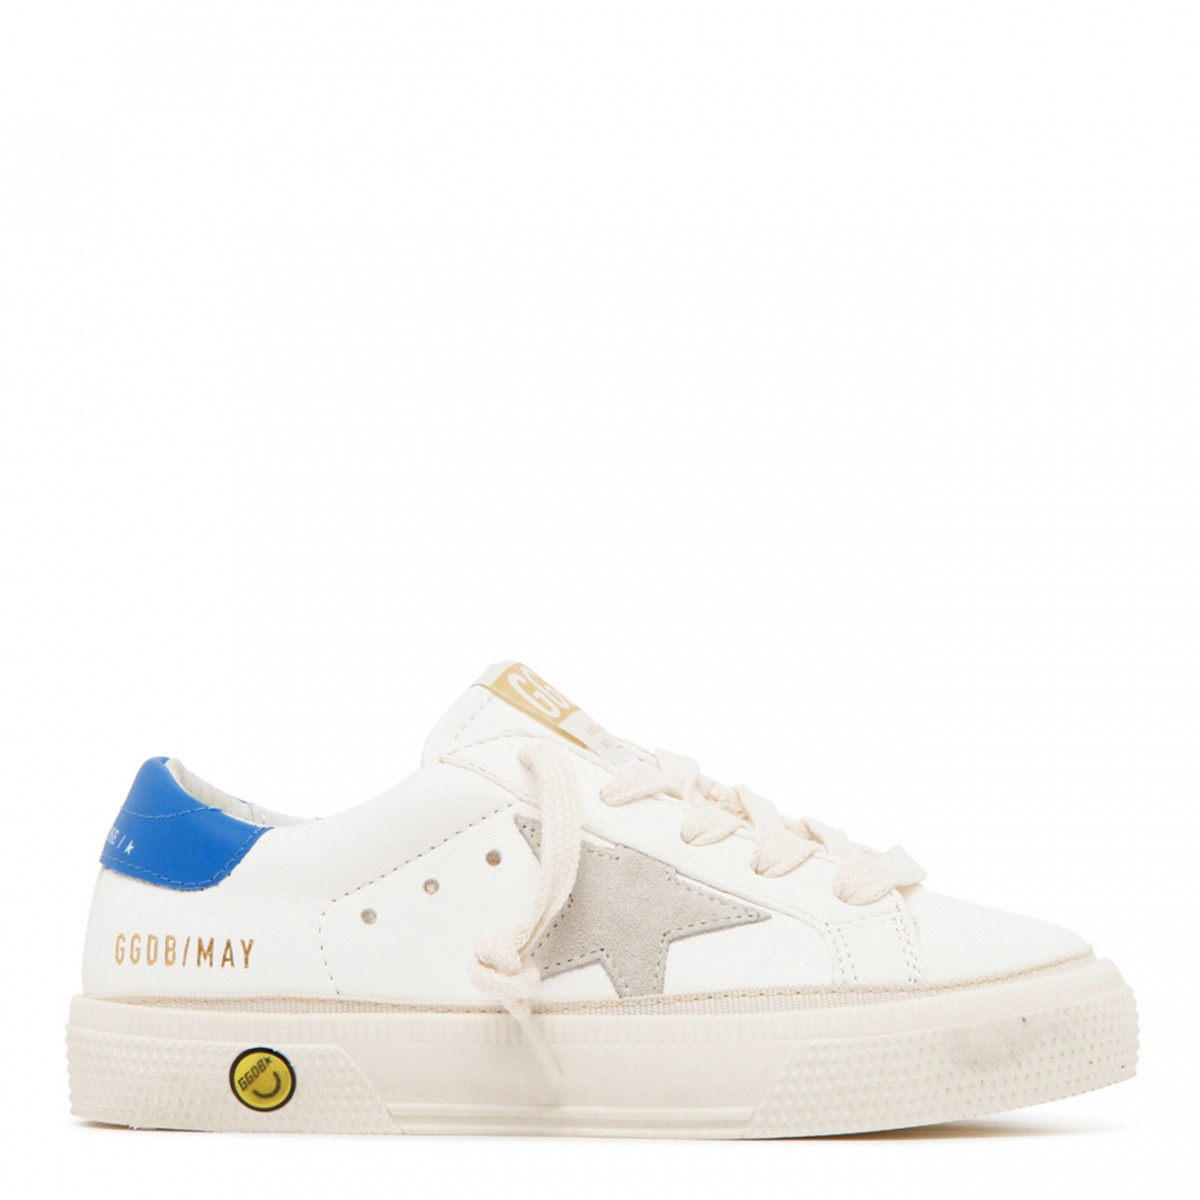 Golden Goose Kids Sky Blue, Ivory and Cream Calf Leather One Star Logo Sneakers.